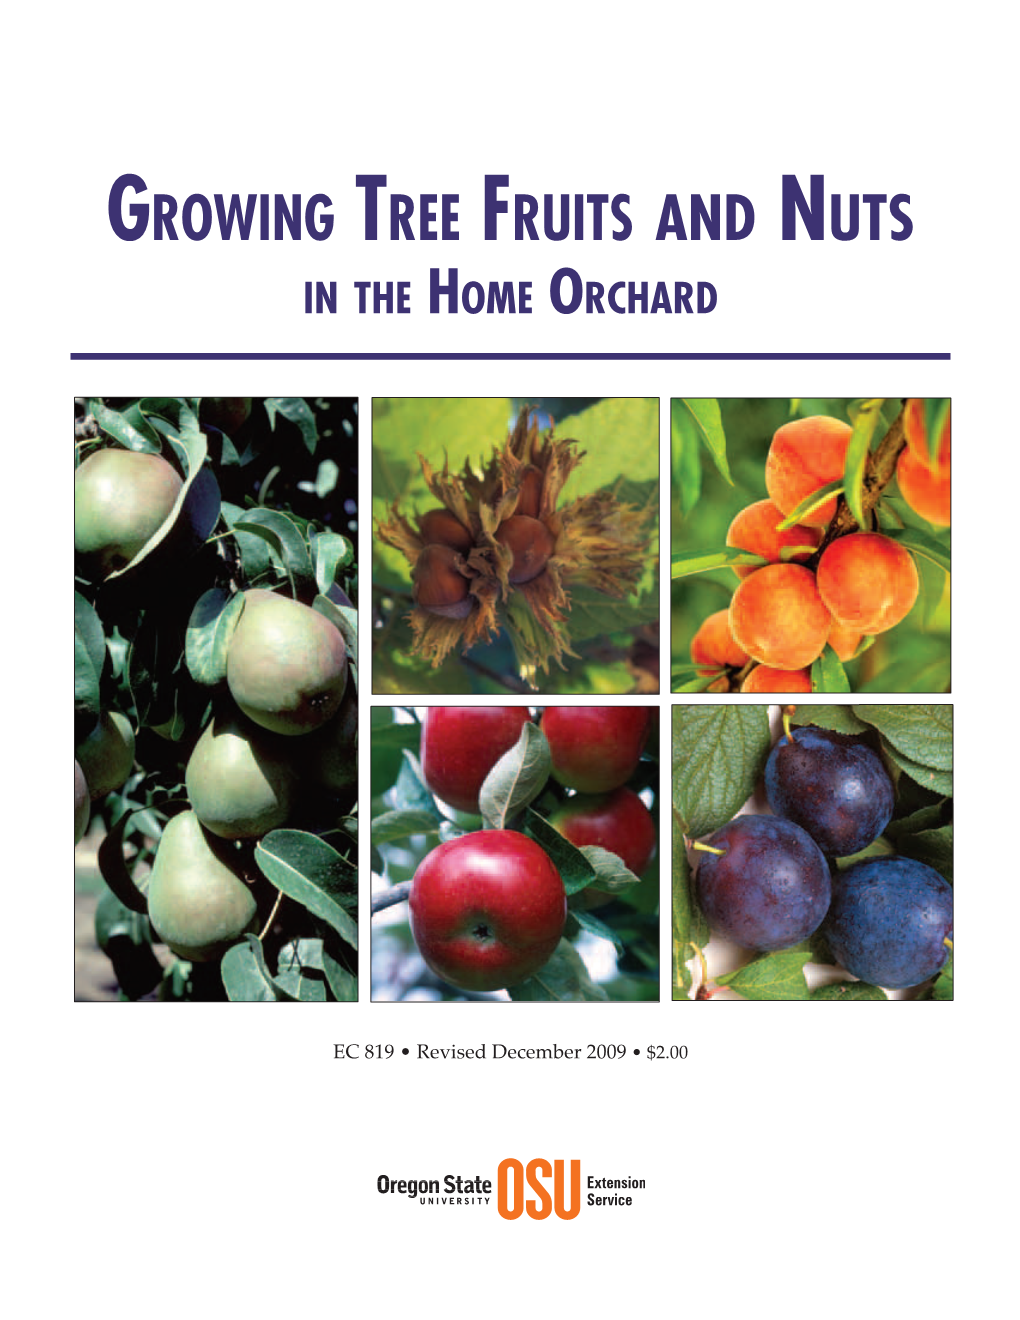 Growing Tree Fruits and Nuts in the Home Orchard